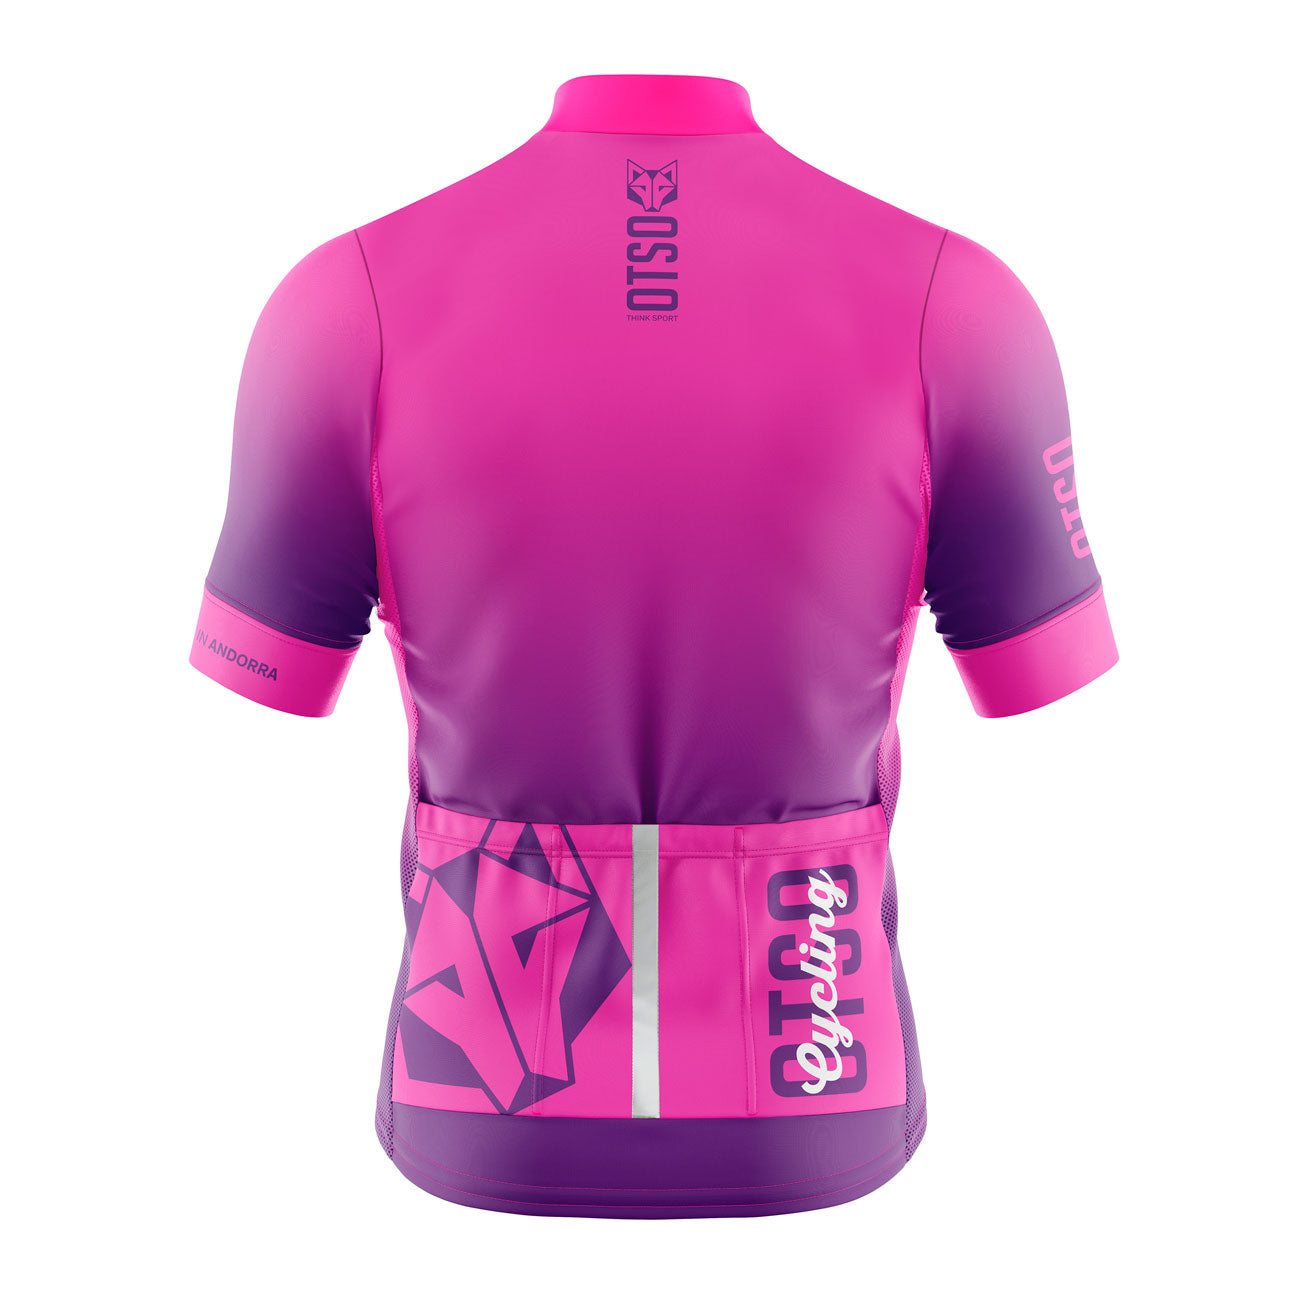 Maillot de ciclismo manga corta mujer - Fluo Pink (Outlet)